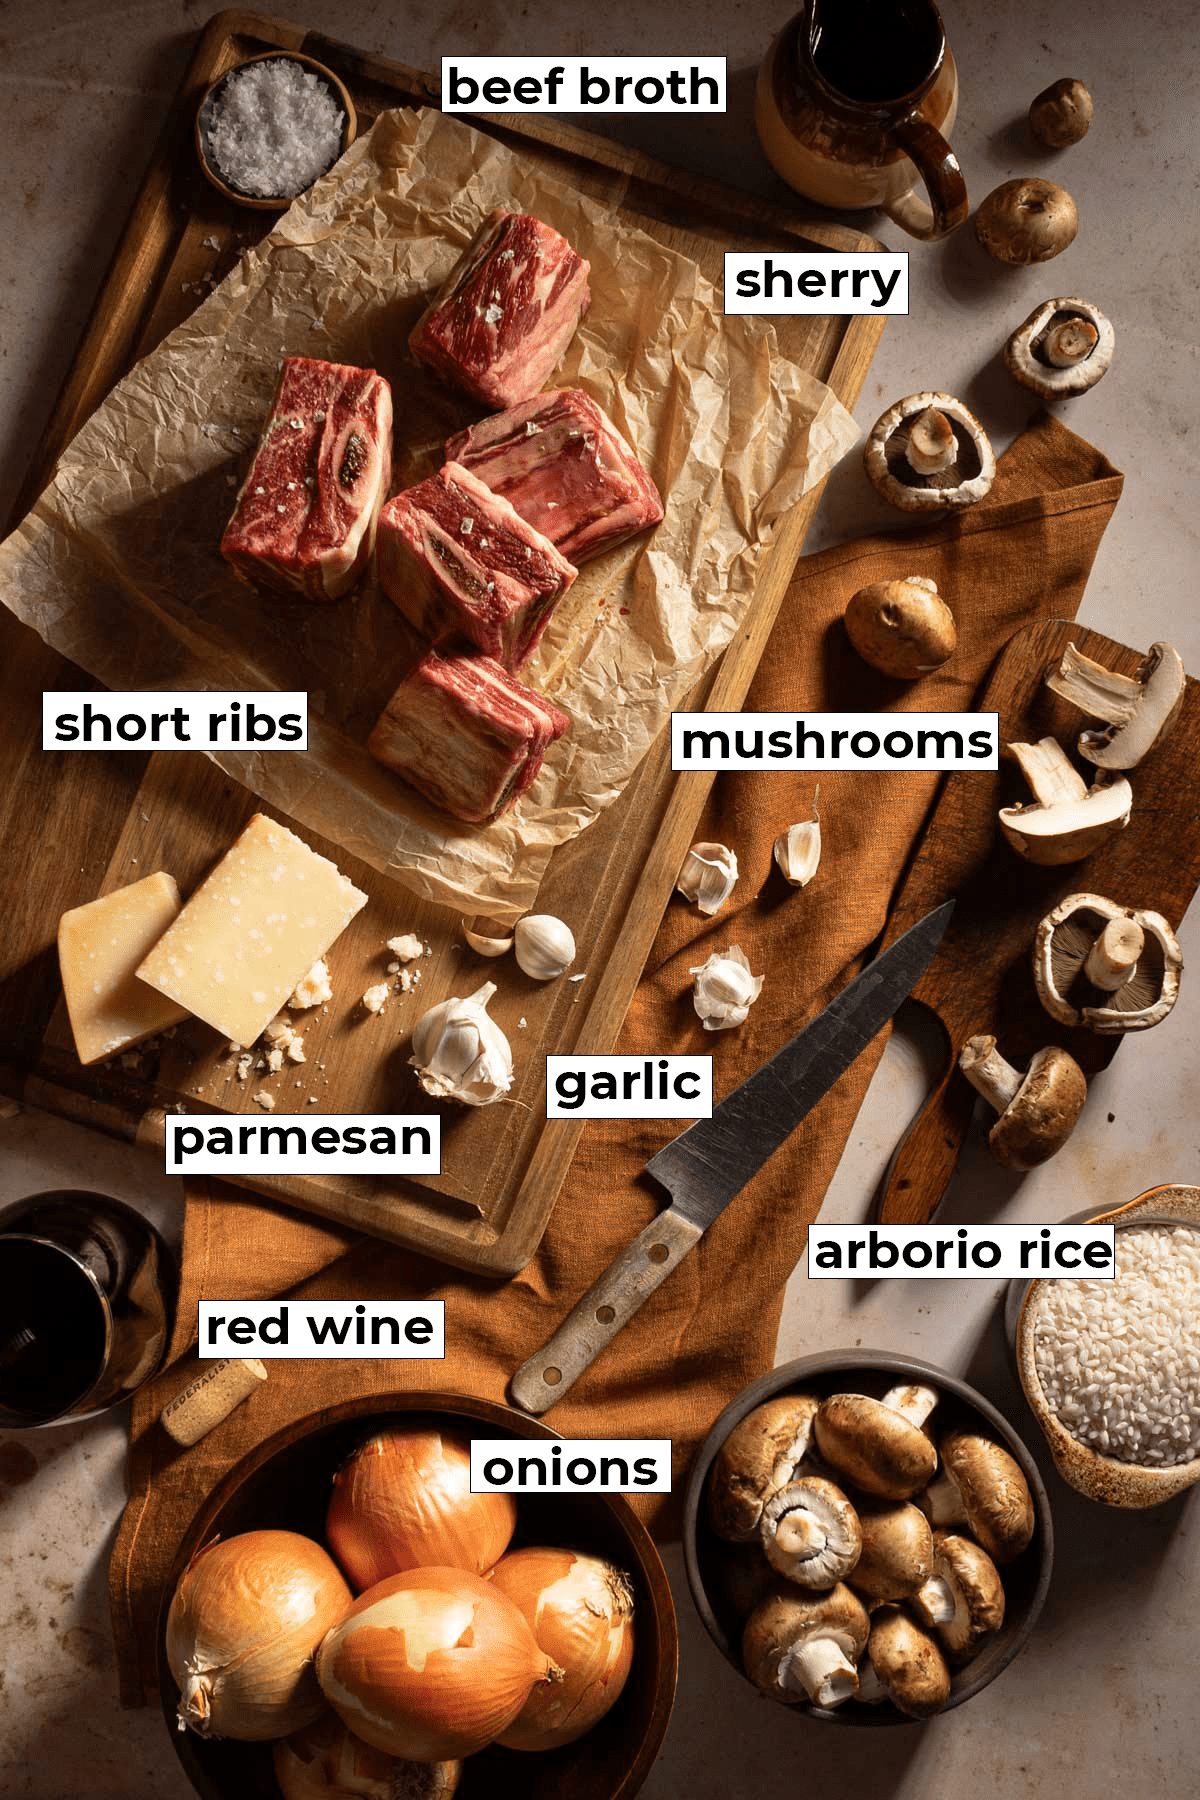 Ingredients needed to make braised short ribs and mushroom risotto.